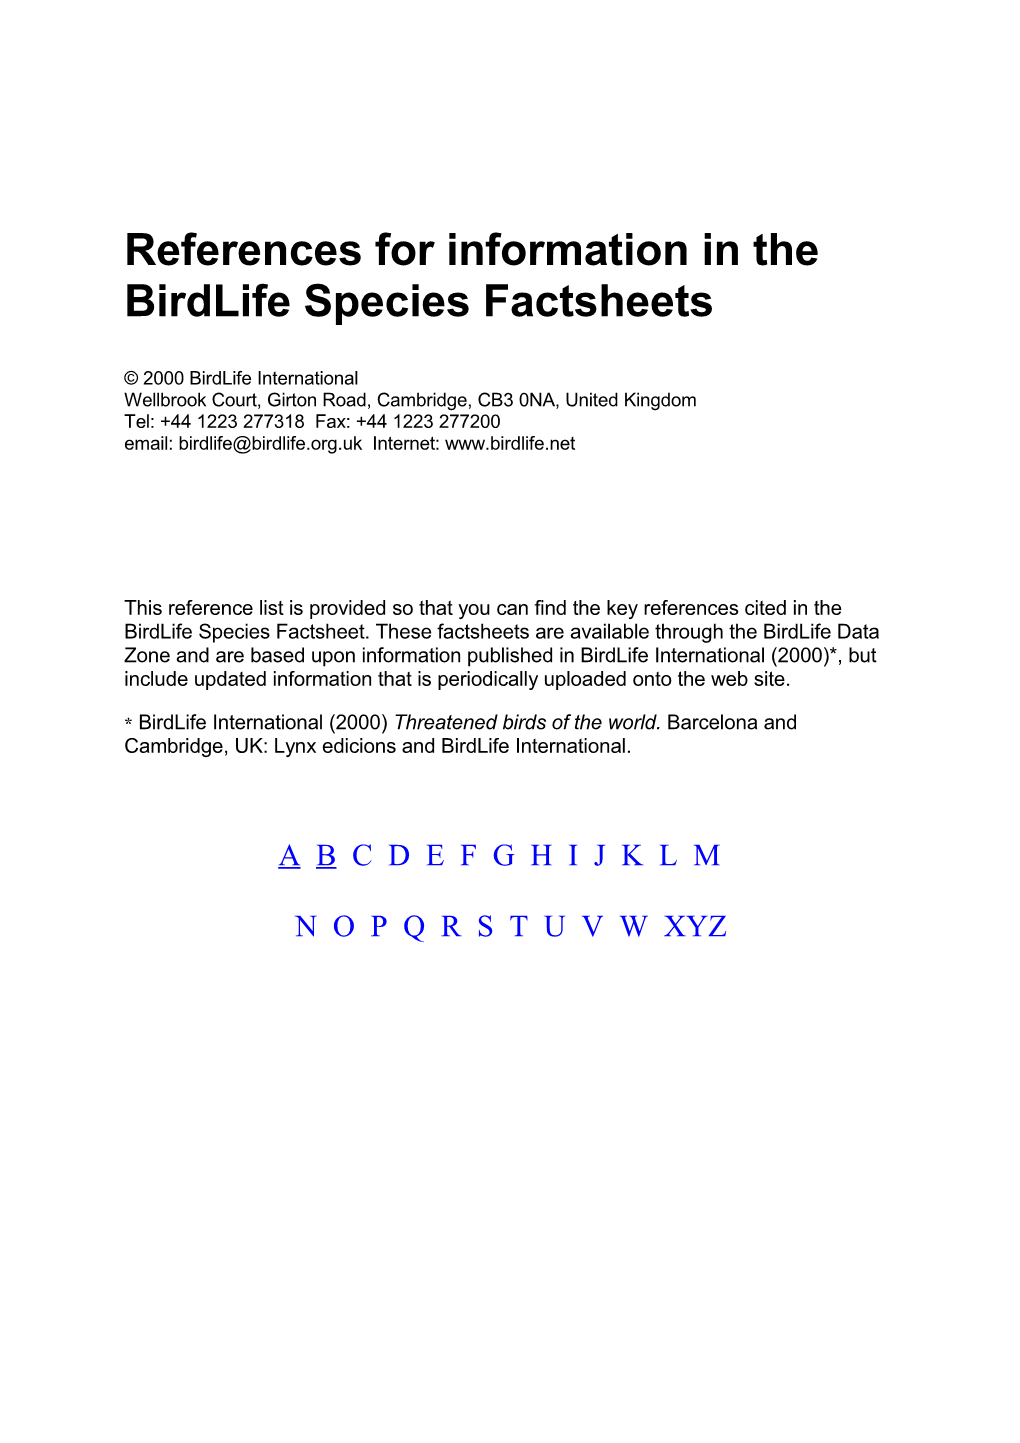 References for Information in The